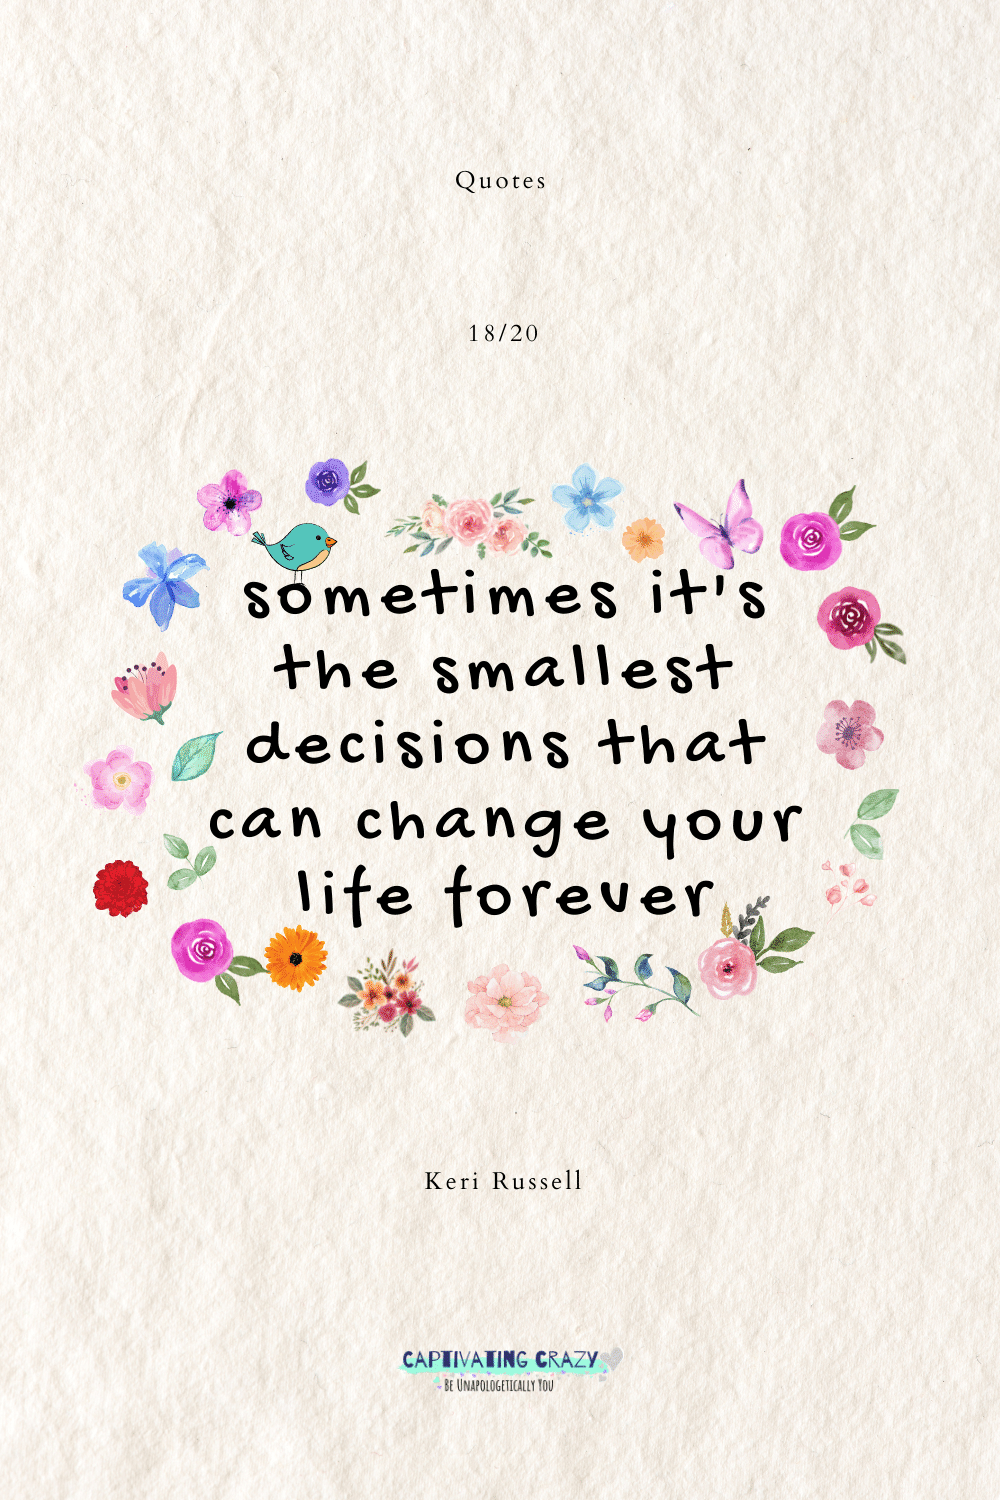 Sometimes it'ss the smallest decision that can change your life forever.